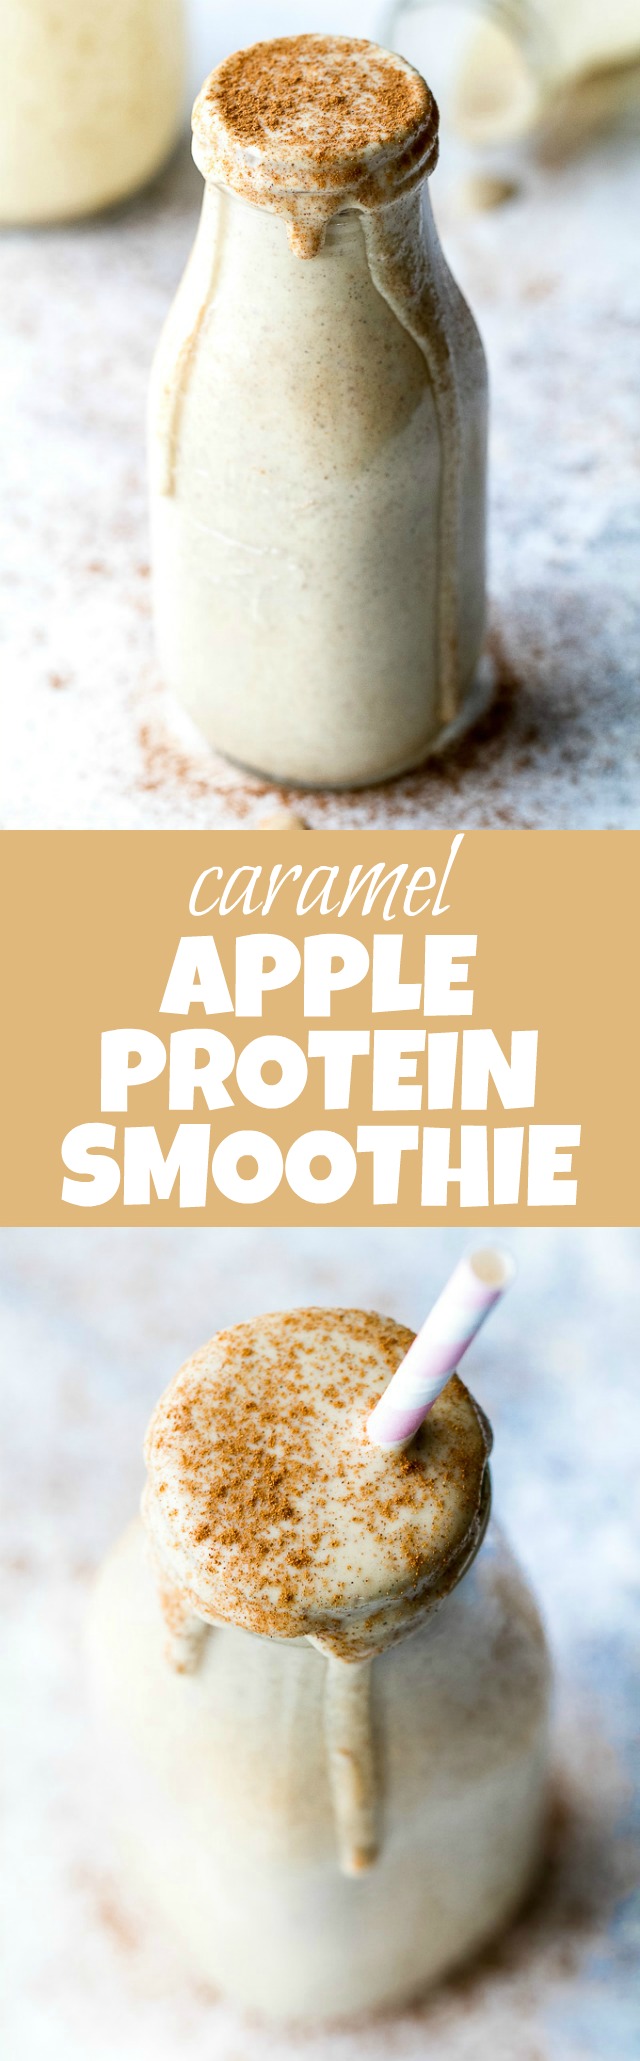 This caramel apple protein smoothie is going to become your favourite way to enjoy an apple a day! It's super creamy, packed with protein, and guaranteed to keep you satisfied all morning! | runningwithspoons.com